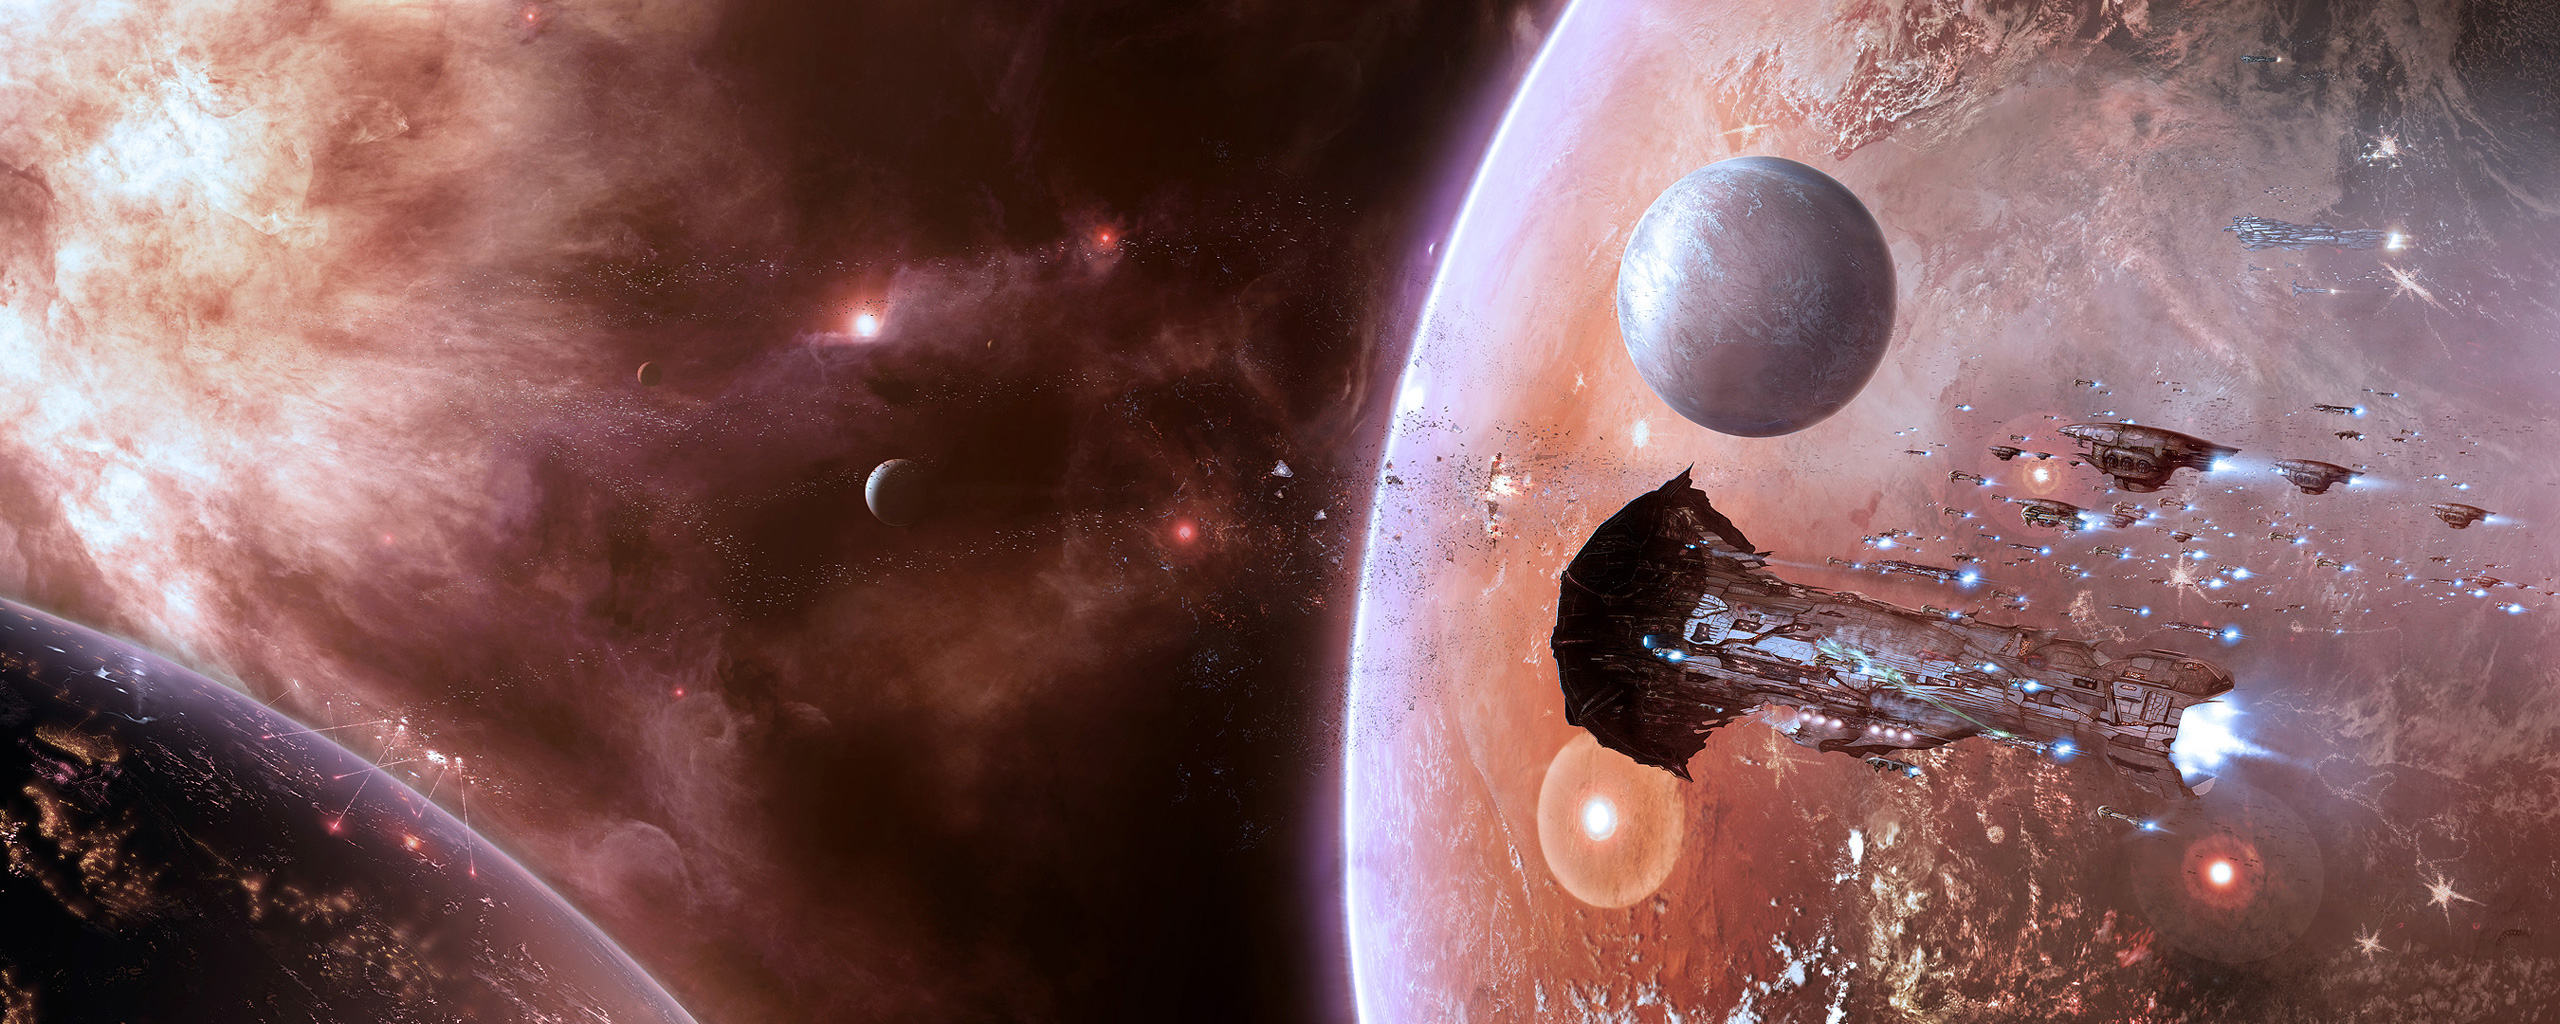 General 2560x1024 space EVE Online spaceship Amarr video games PC gaming science fiction planet digital art